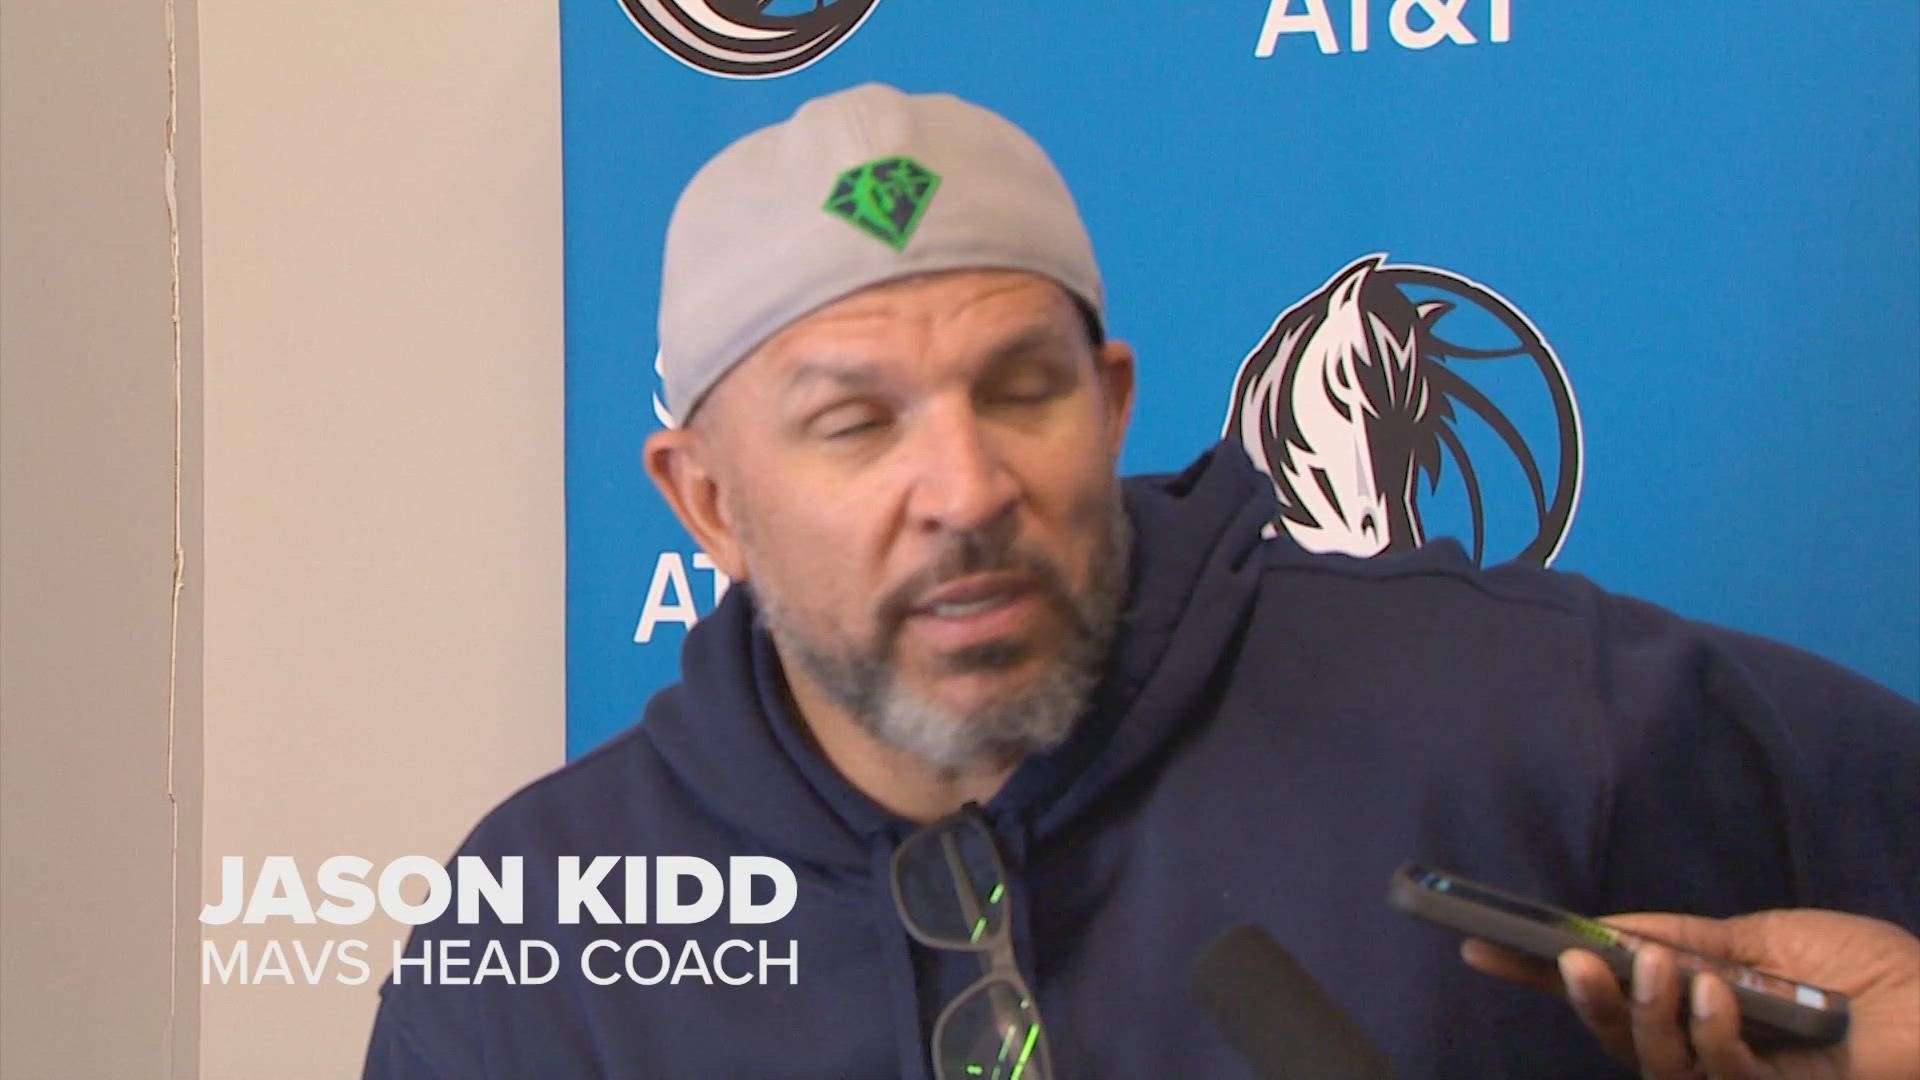 Jason Kidd spoke to the media Tuesday afternoon, saying the team is preparing to be both with and without Luka Doncic for the start of the 2022 playoffs.